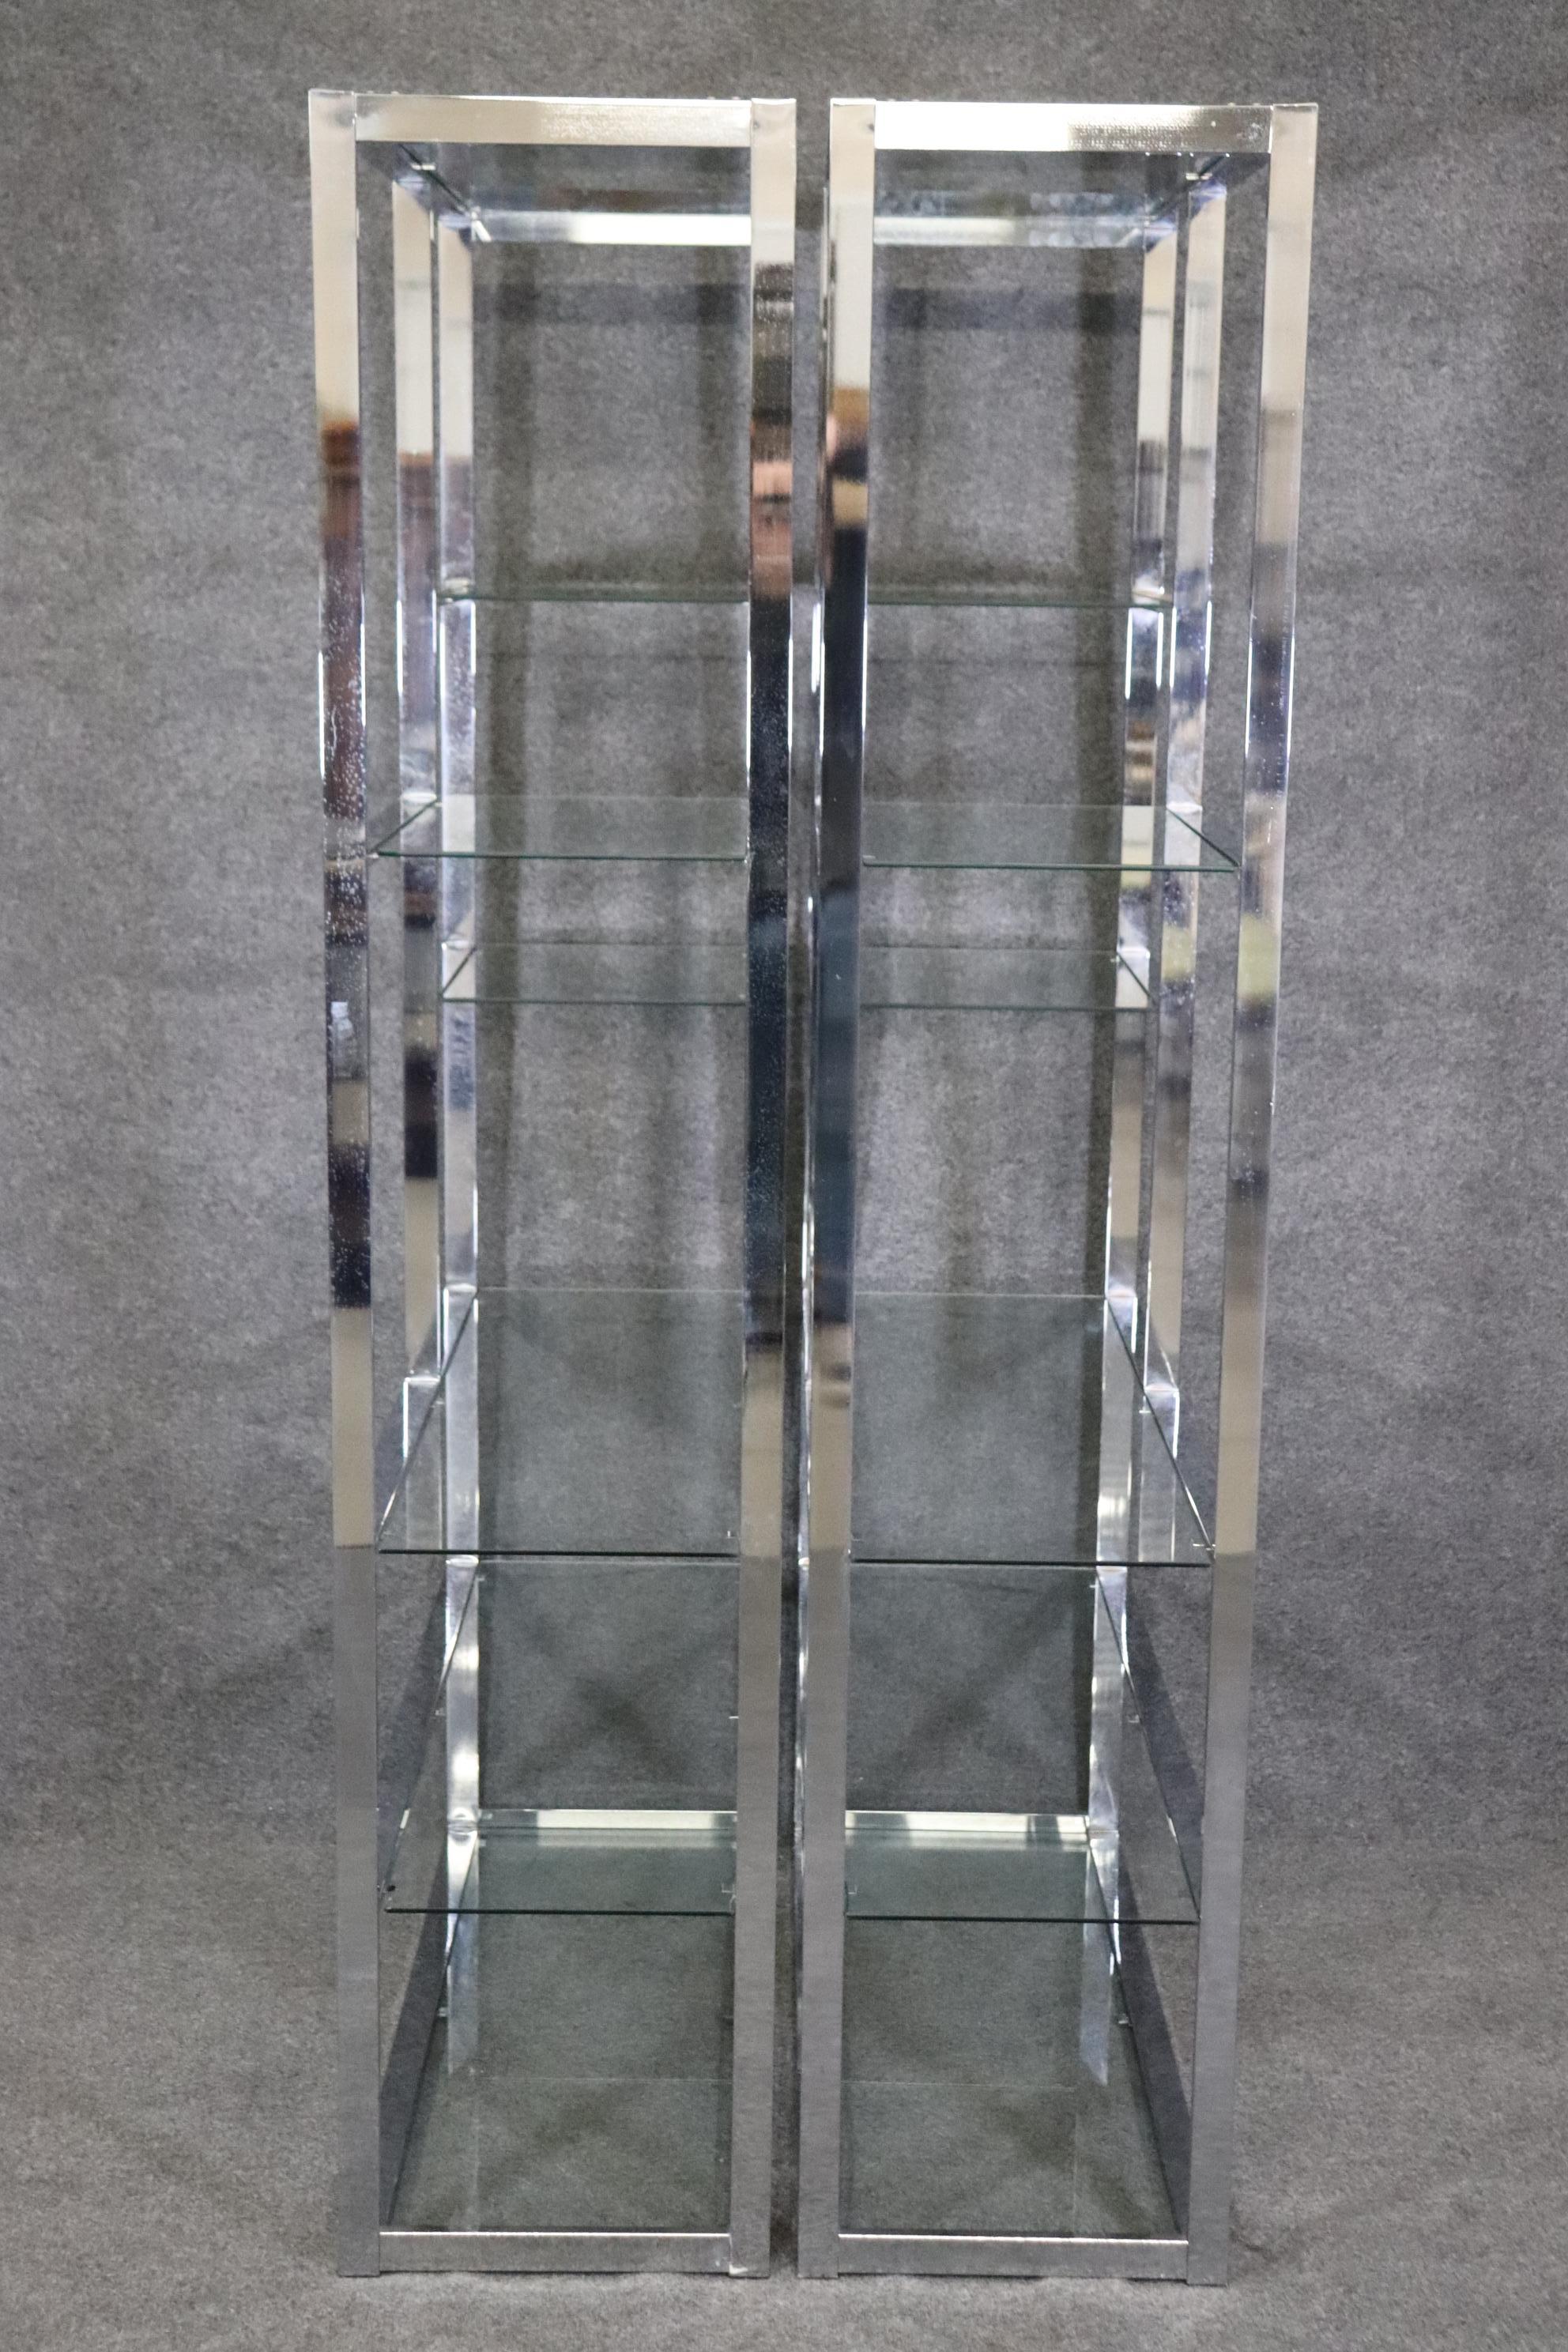 Dimensions- H: 78in W: 42in D: 16 1/4in 
This Pair of midcentury Milo Baughman Style Chrome and Glass Etageres are made of the highest quality and are truly a prime example of Mid Century Modern luxury decor/furniture. If you look at the photos